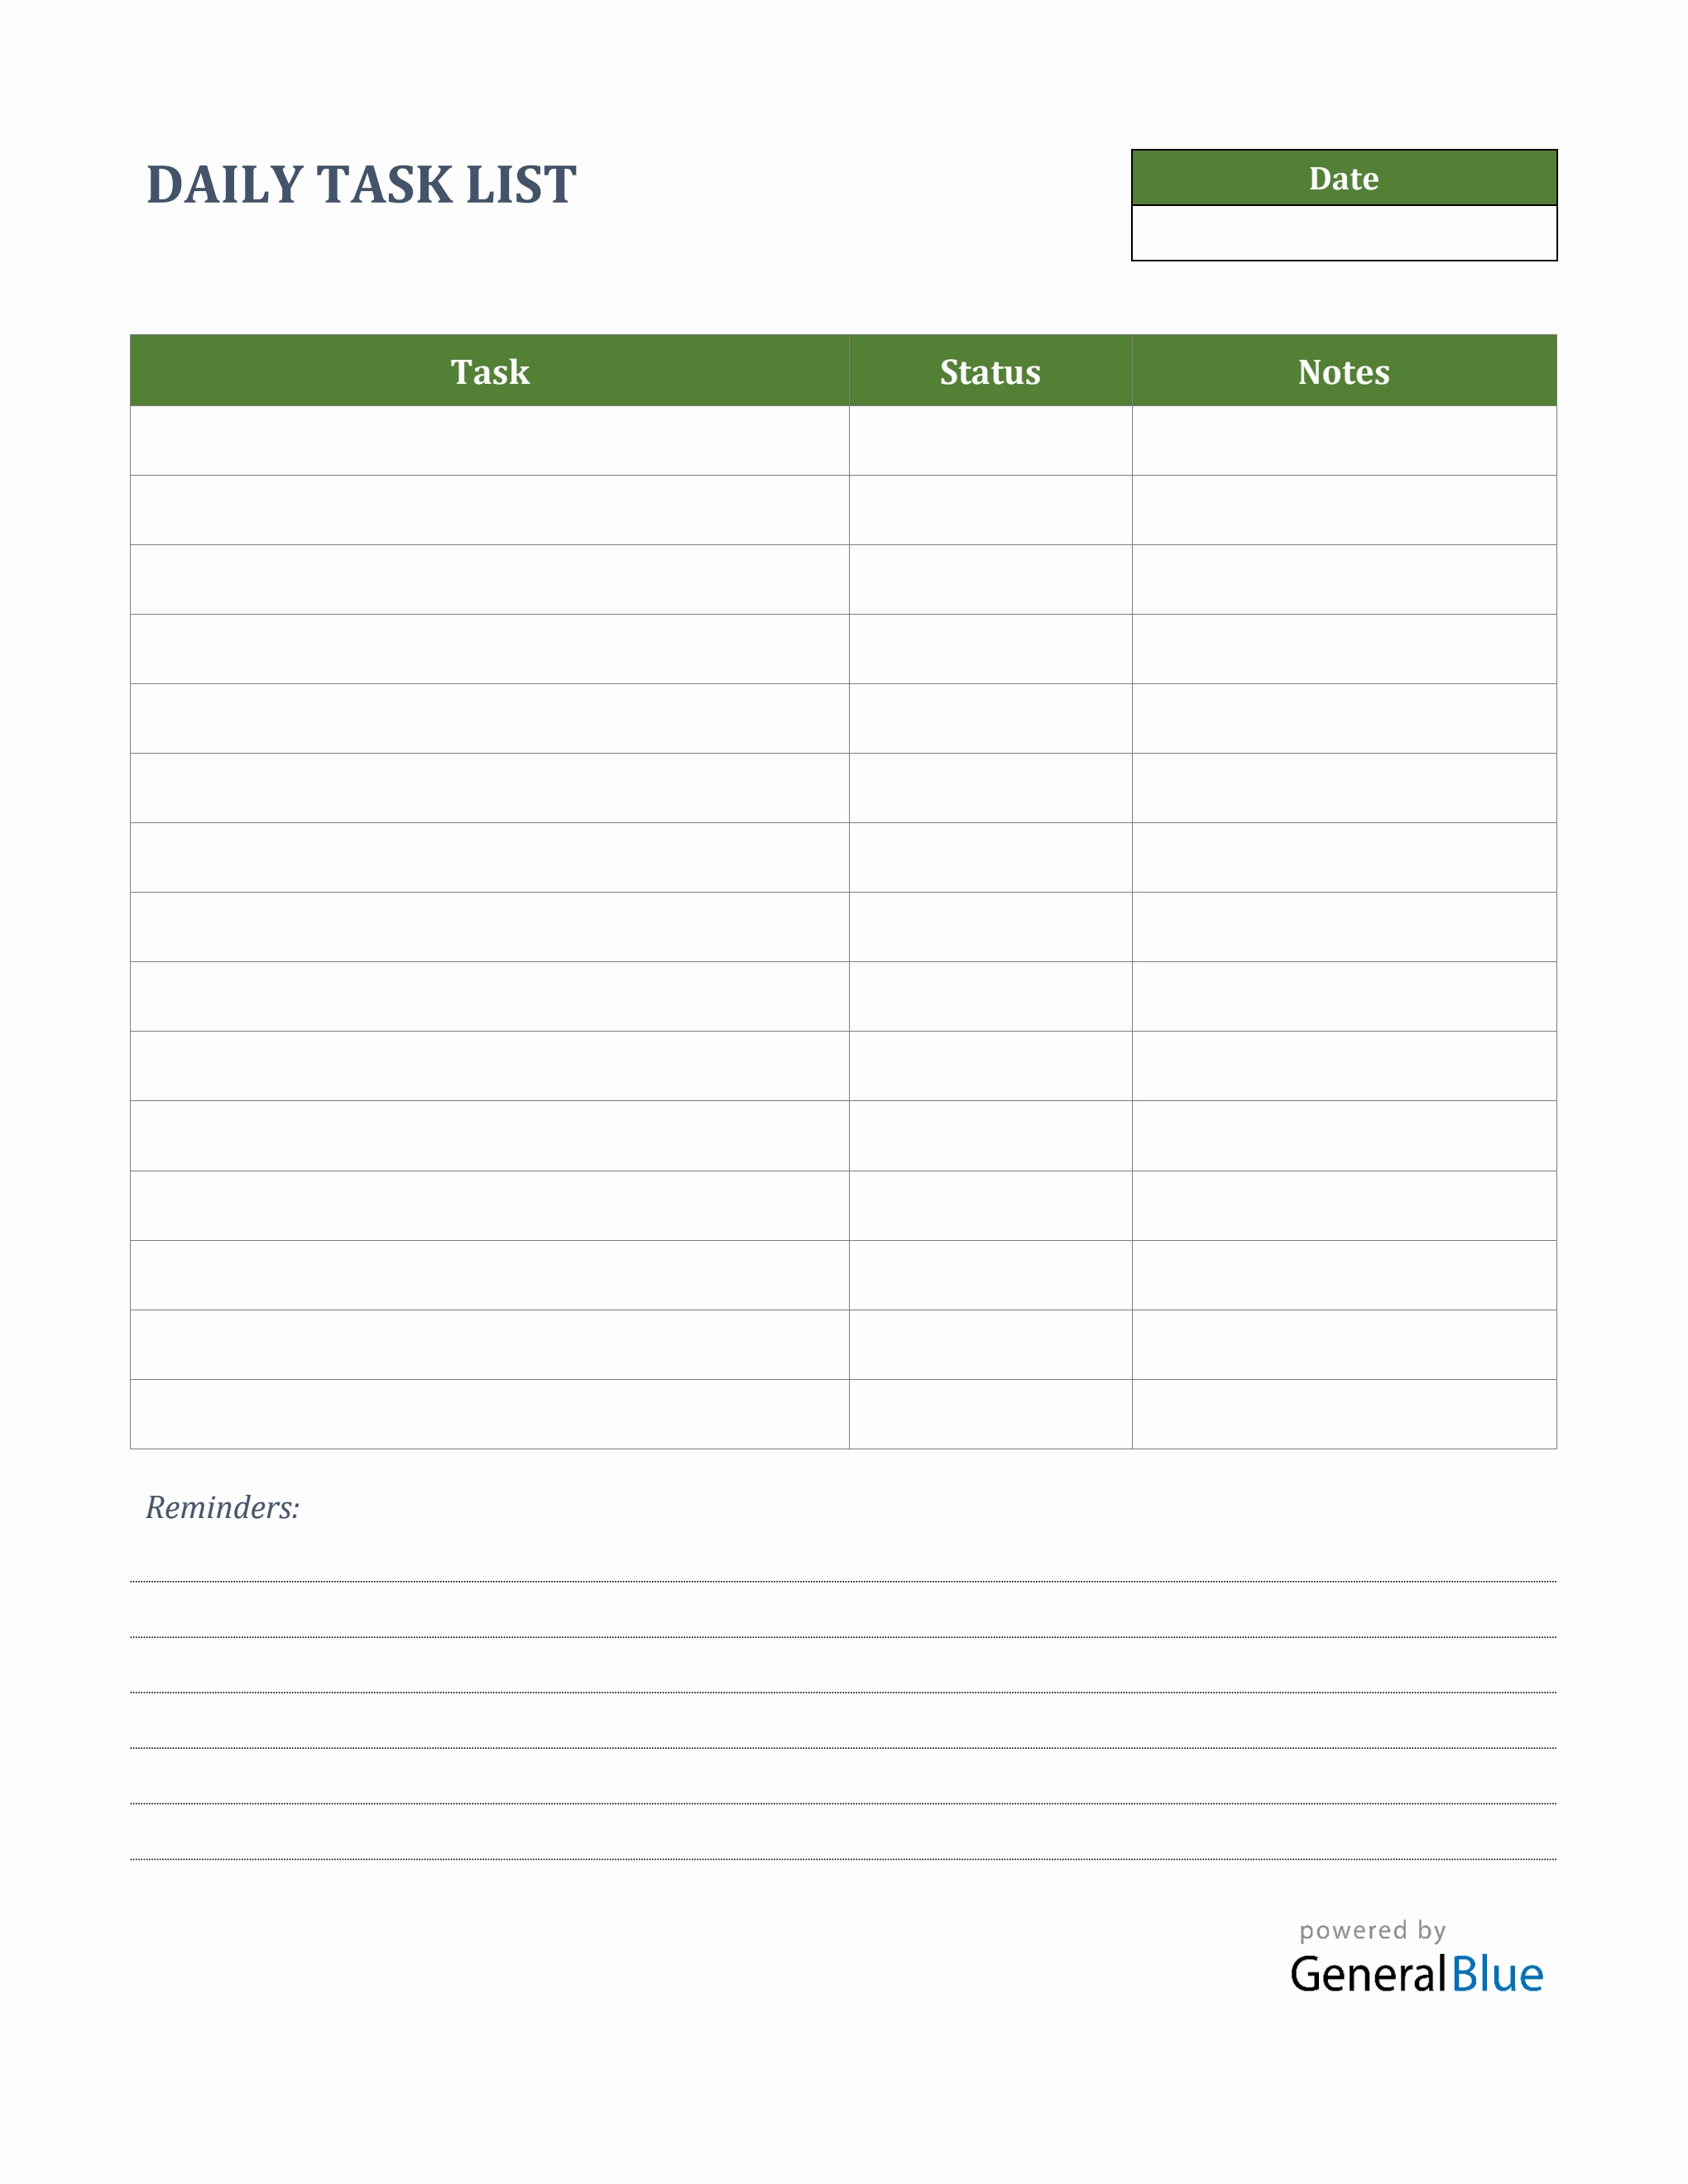 daily-task-list-template-in-word